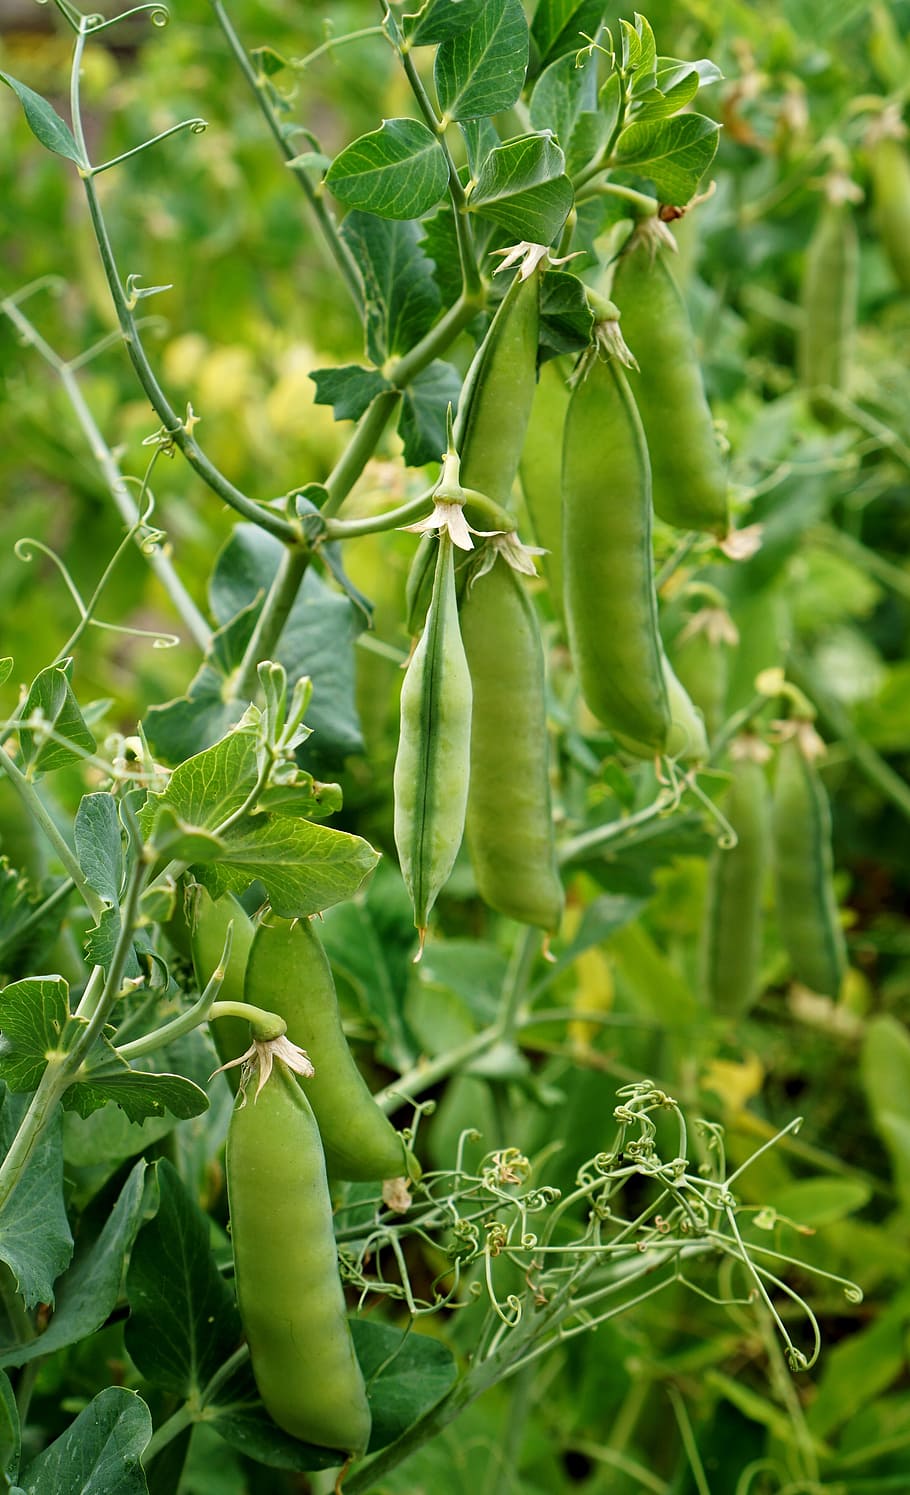 Peas, Garden, Pods, Beds, the cultivation of, green peas, vegetables legumes, weeding, vegetables, vegetable